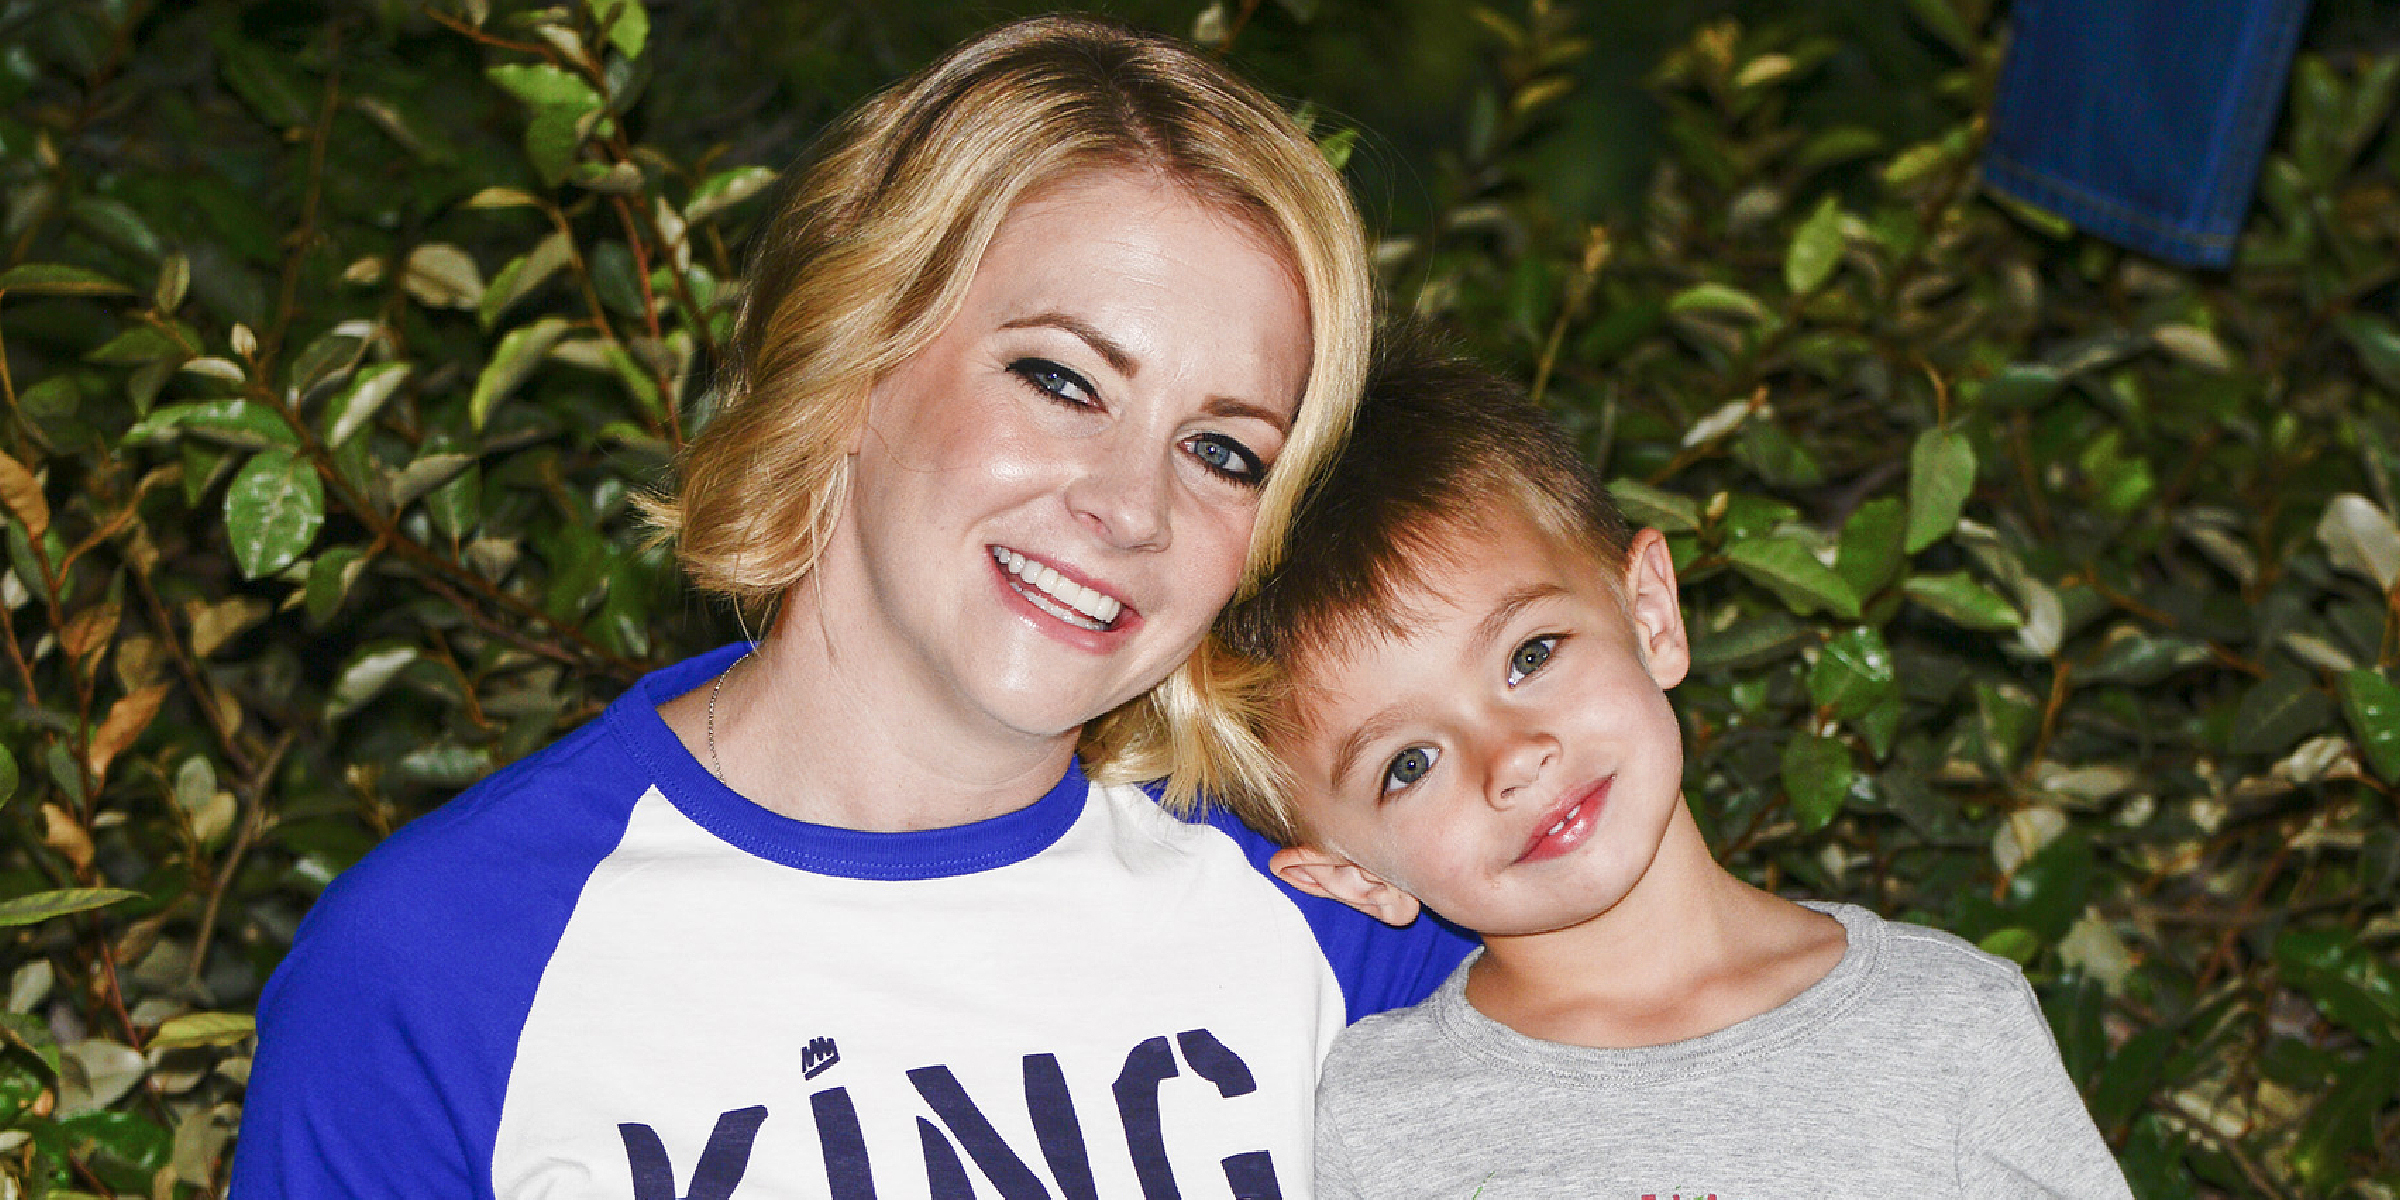 Melissa Joan Hart and son Tucker at Smashbox Studios on October 25, 2015, in Culver City, California. | Source: Getty Images